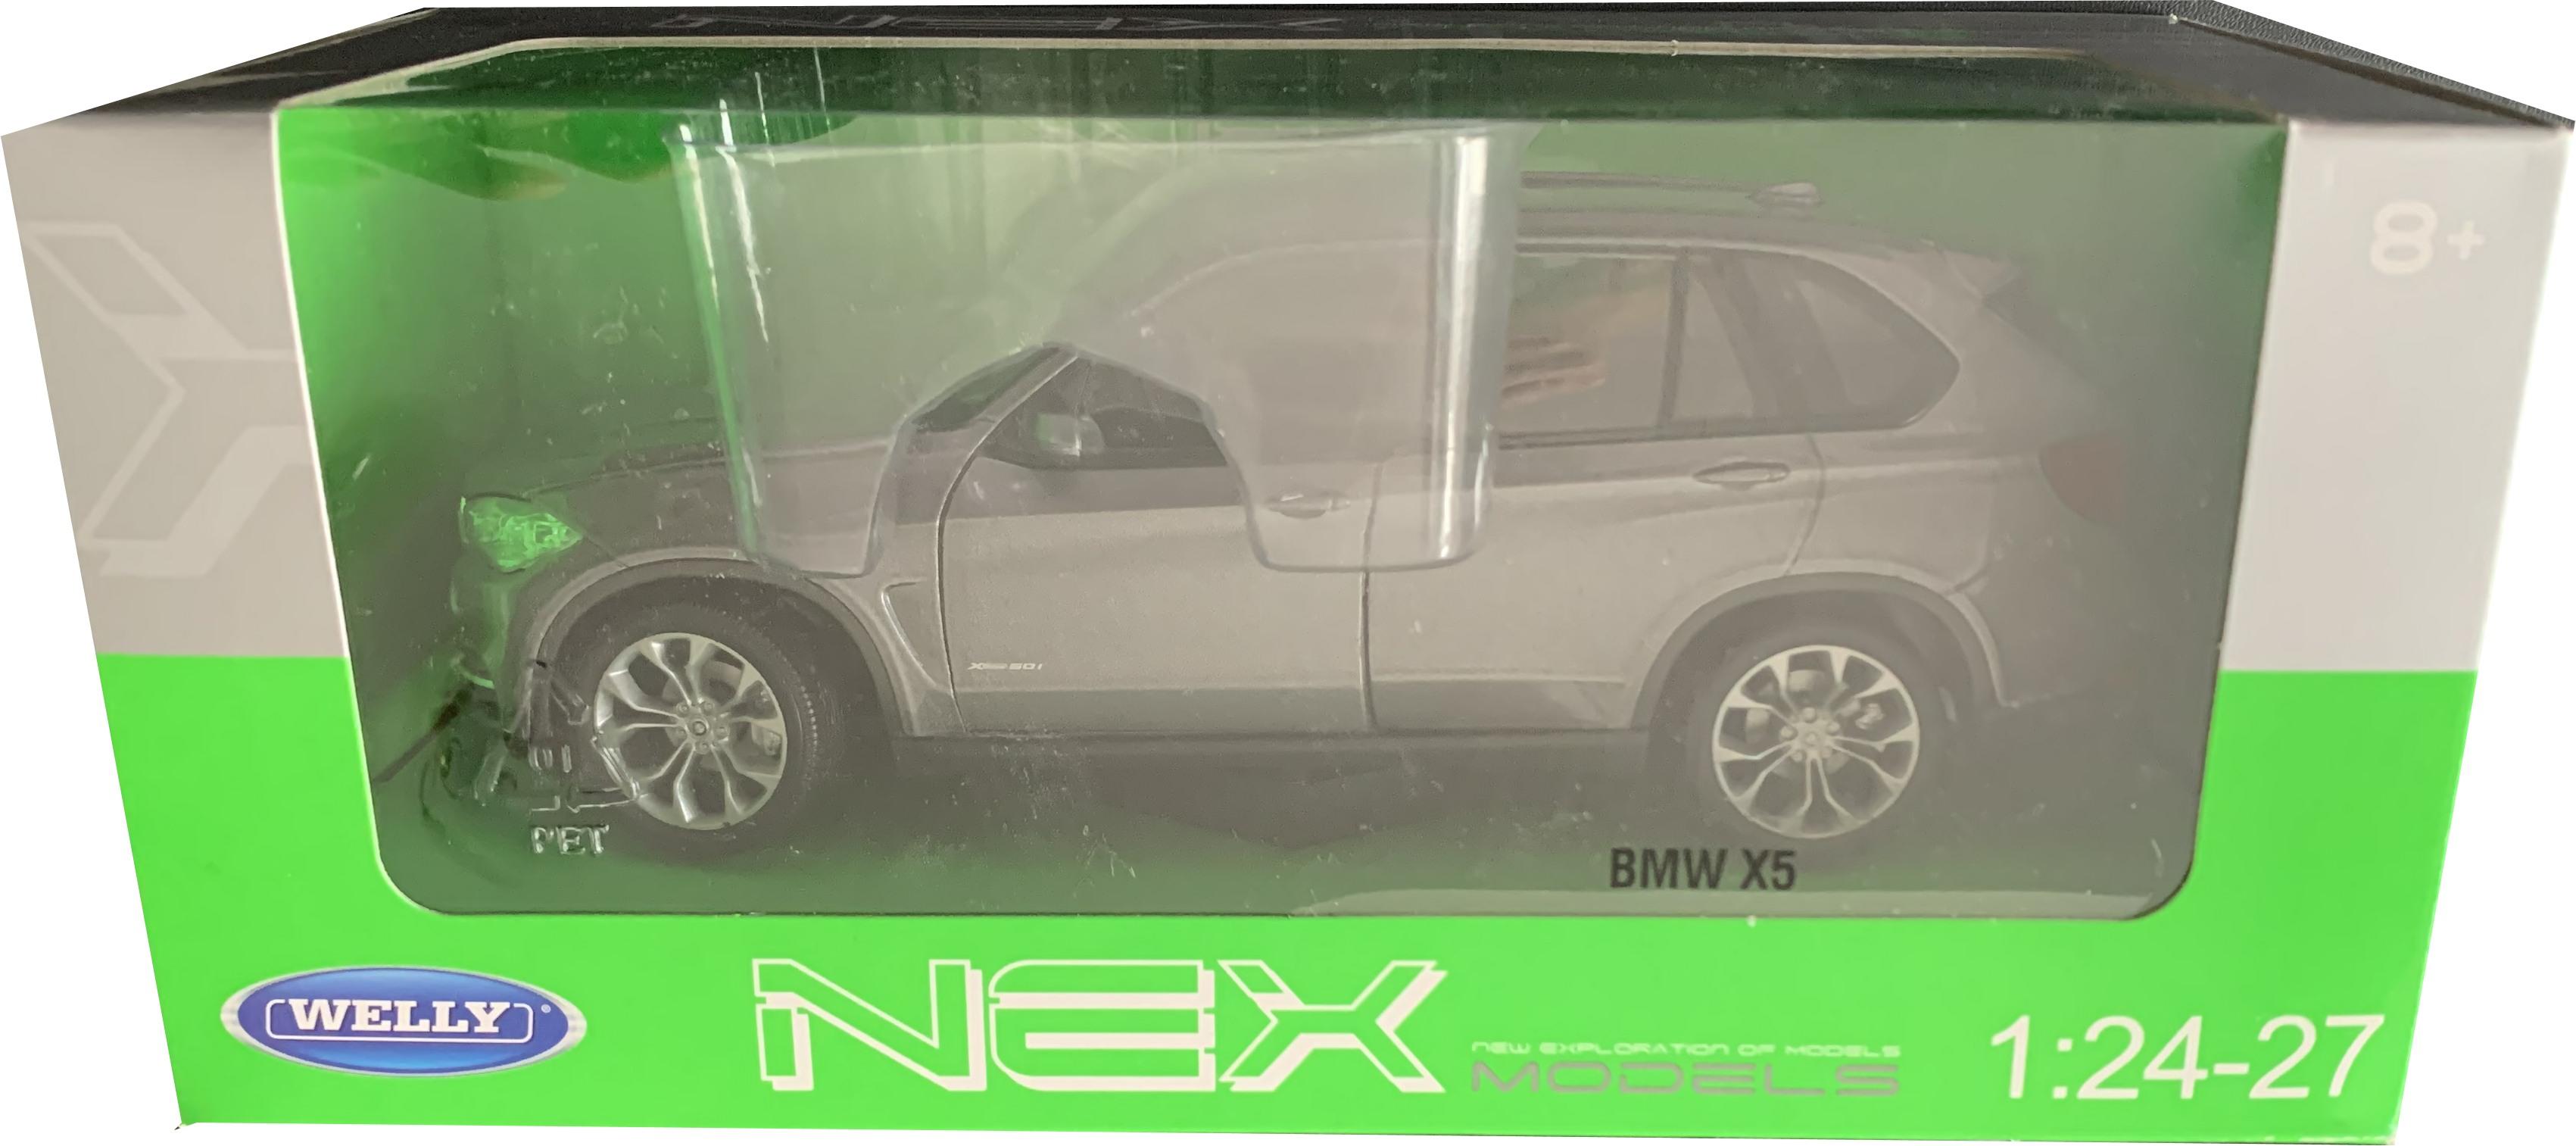 BMW X5 (F15) in metallic grey 1:24 scale model from Welly